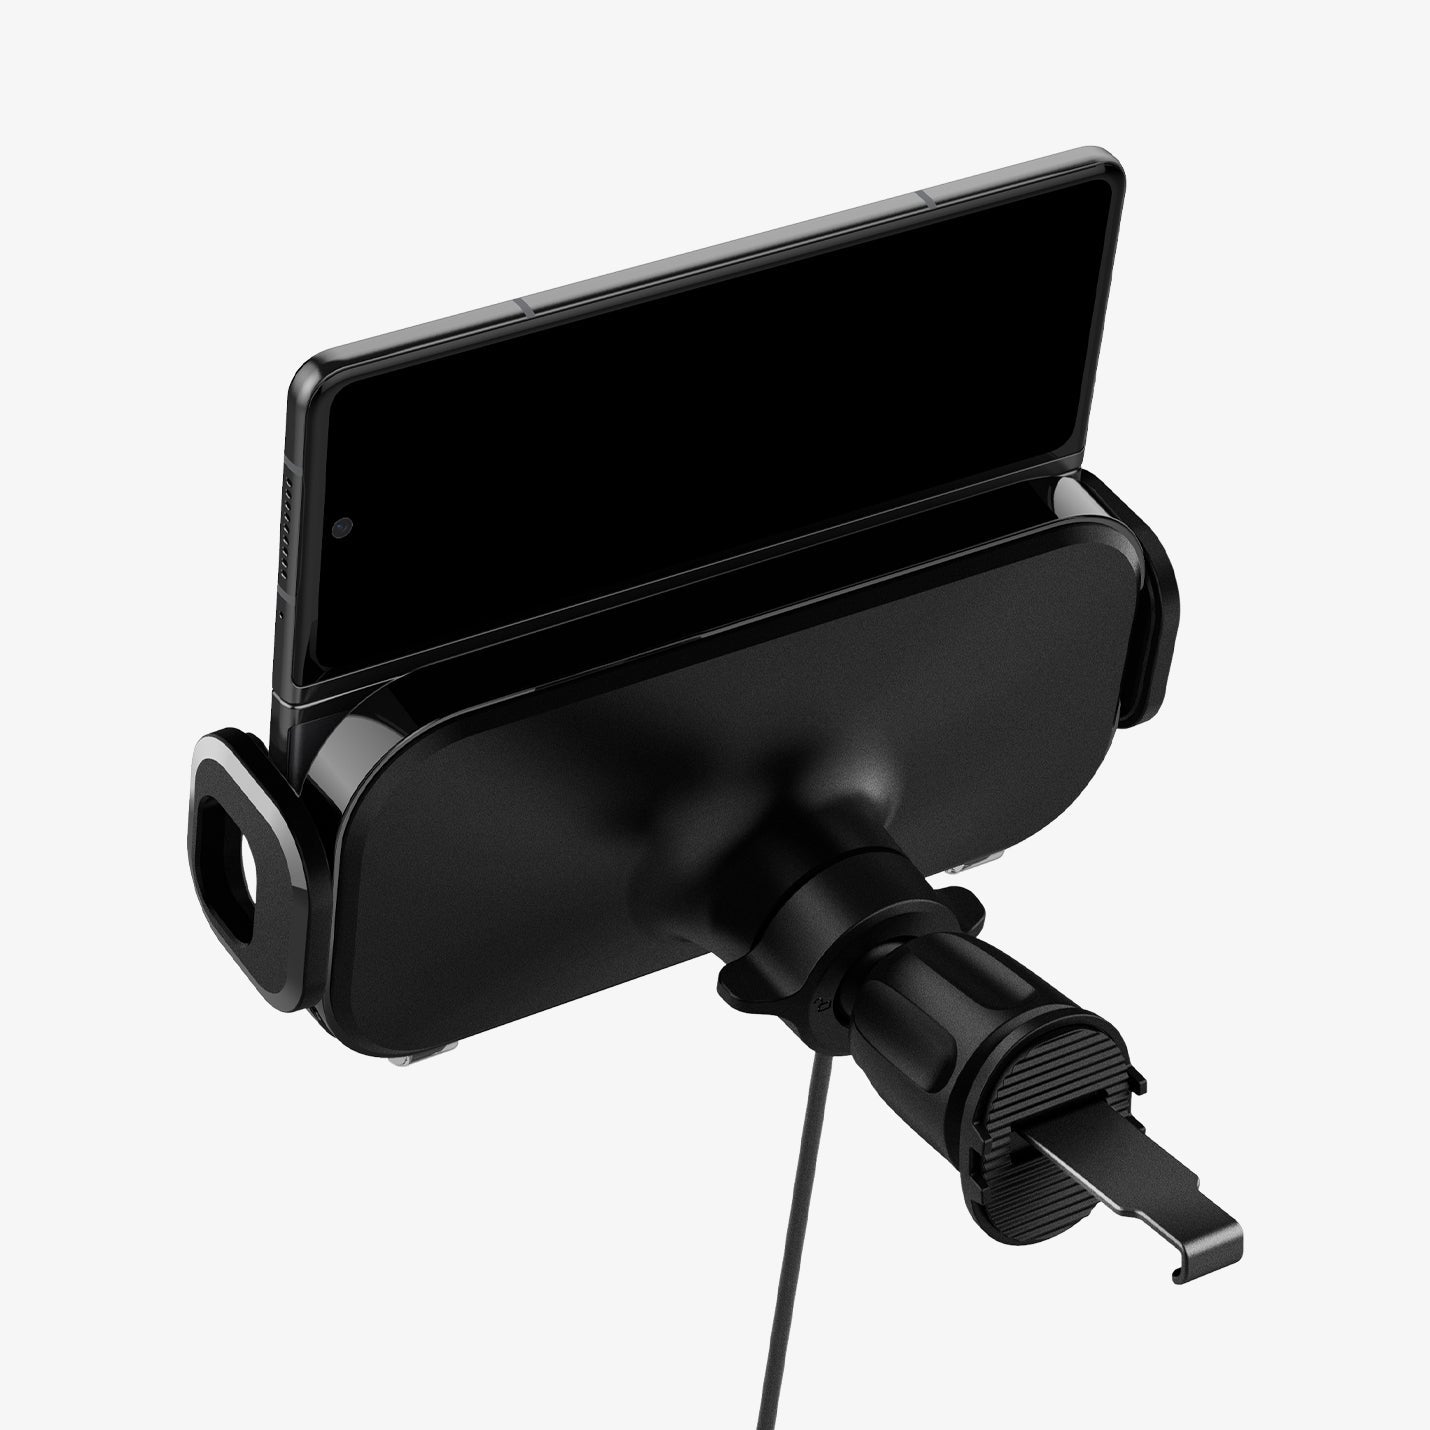 ACP04279 - GTS12W OneTap Wireless Galaxy Fold Car Mount Airvent in black showing the back with galaxy fold device in slot